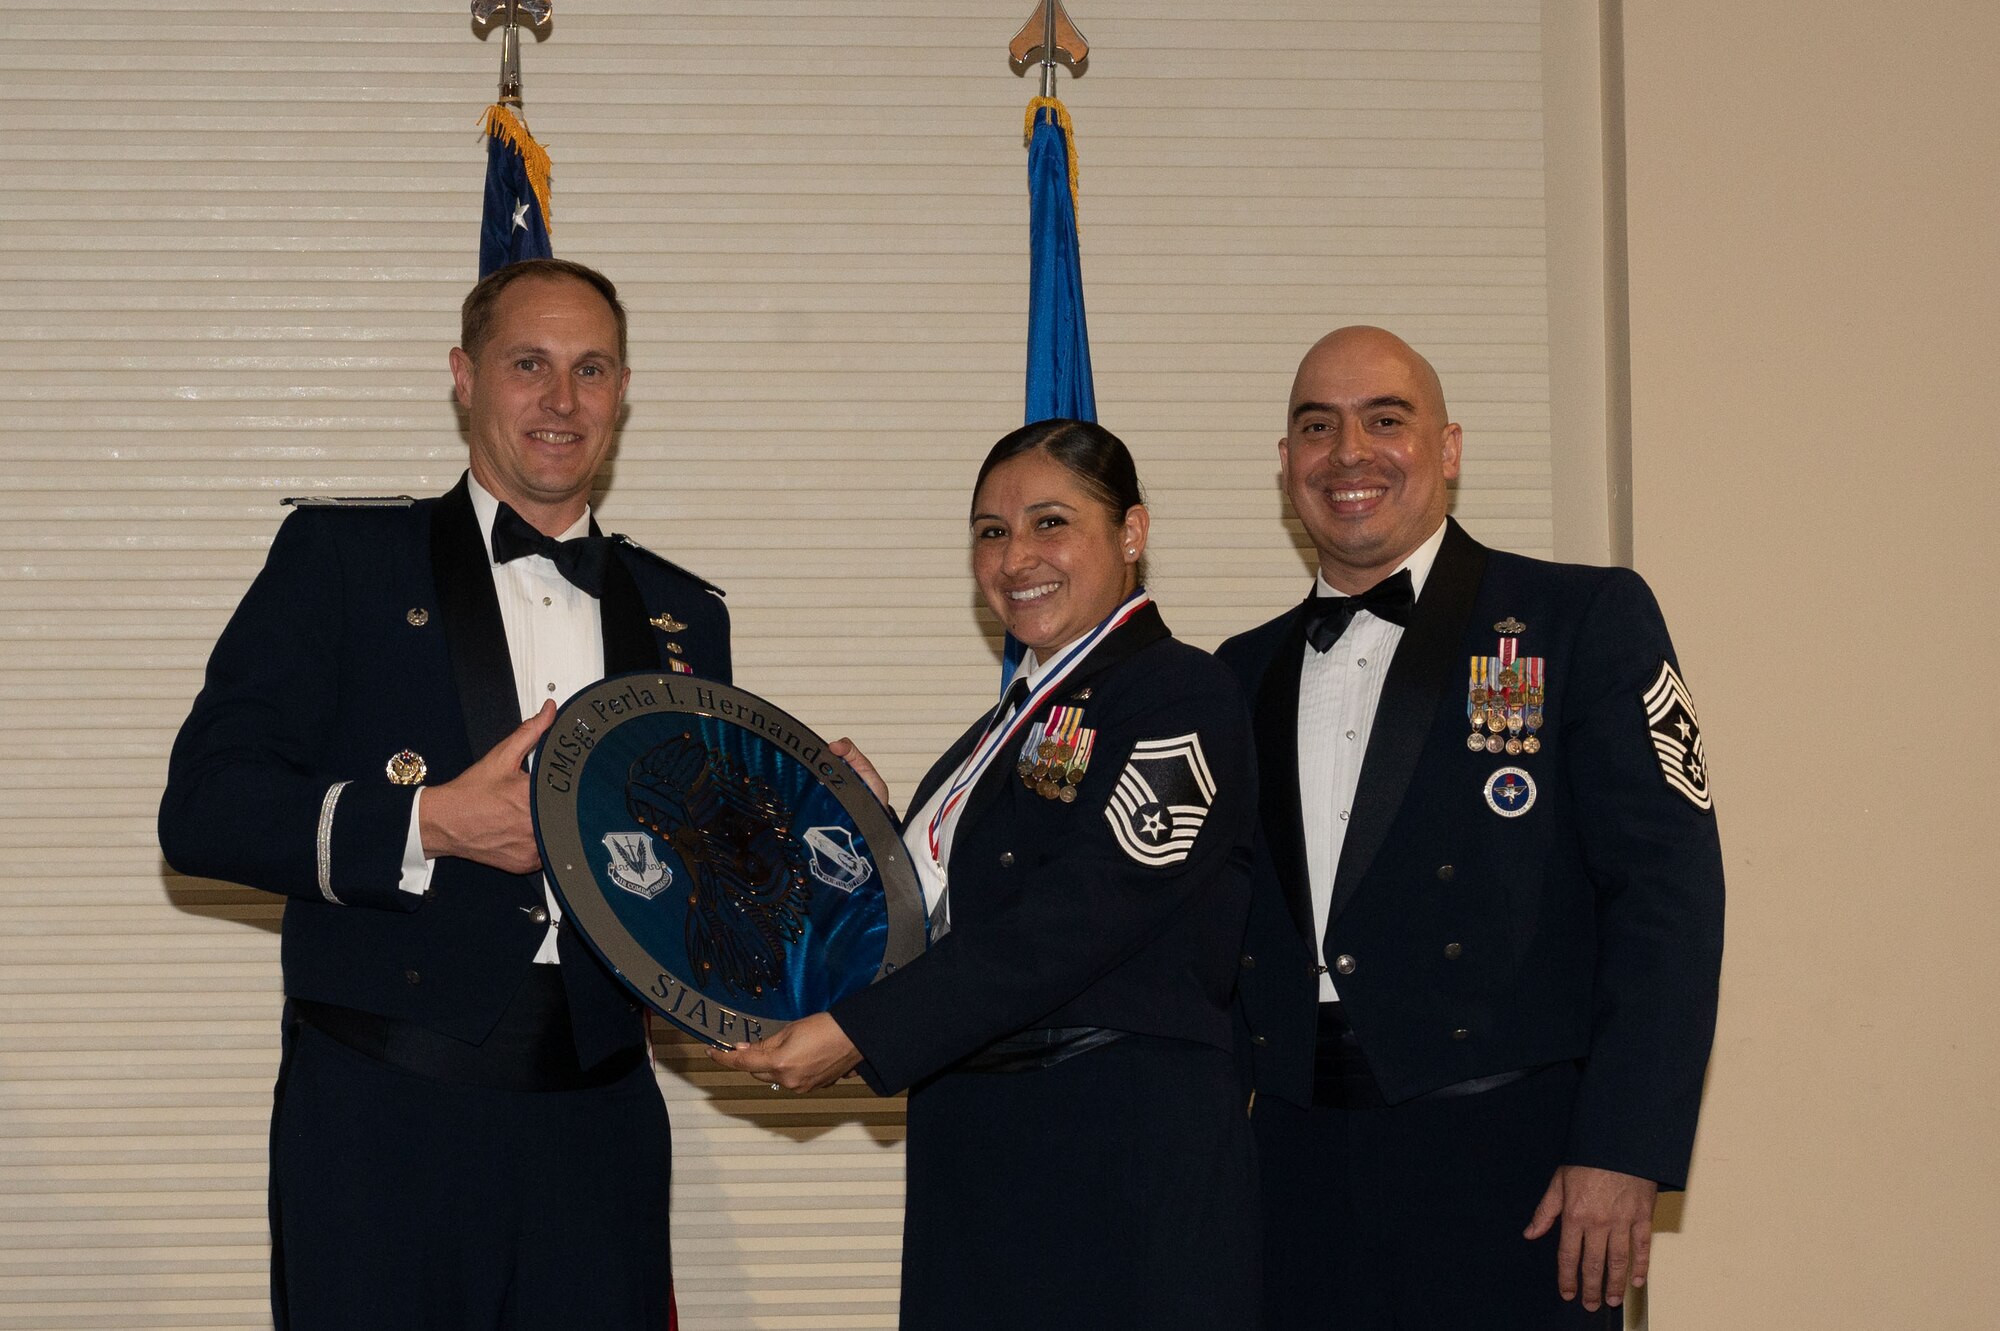 Col. Lucas Teel, 4th Fighter Wing commander, and Chief Master Sgt. Peter Martinez, 4th FW command chief, present a plaque to Senior Master Sgt. Perla Hernandez, 4th Force Support Squadron sustainment services flight chief, during a Chief Master Sergeant Recognition Ceremony at Seymour Johnson Air Force Base, North Carolina, March 24, 2023. No more than 1.25% of the Air Force enlisted force may hold the rank of chief master sergeant by federal law. (U.S. Air Force photo by Airman 1st Class Rebecca Sirimarco-Lang)